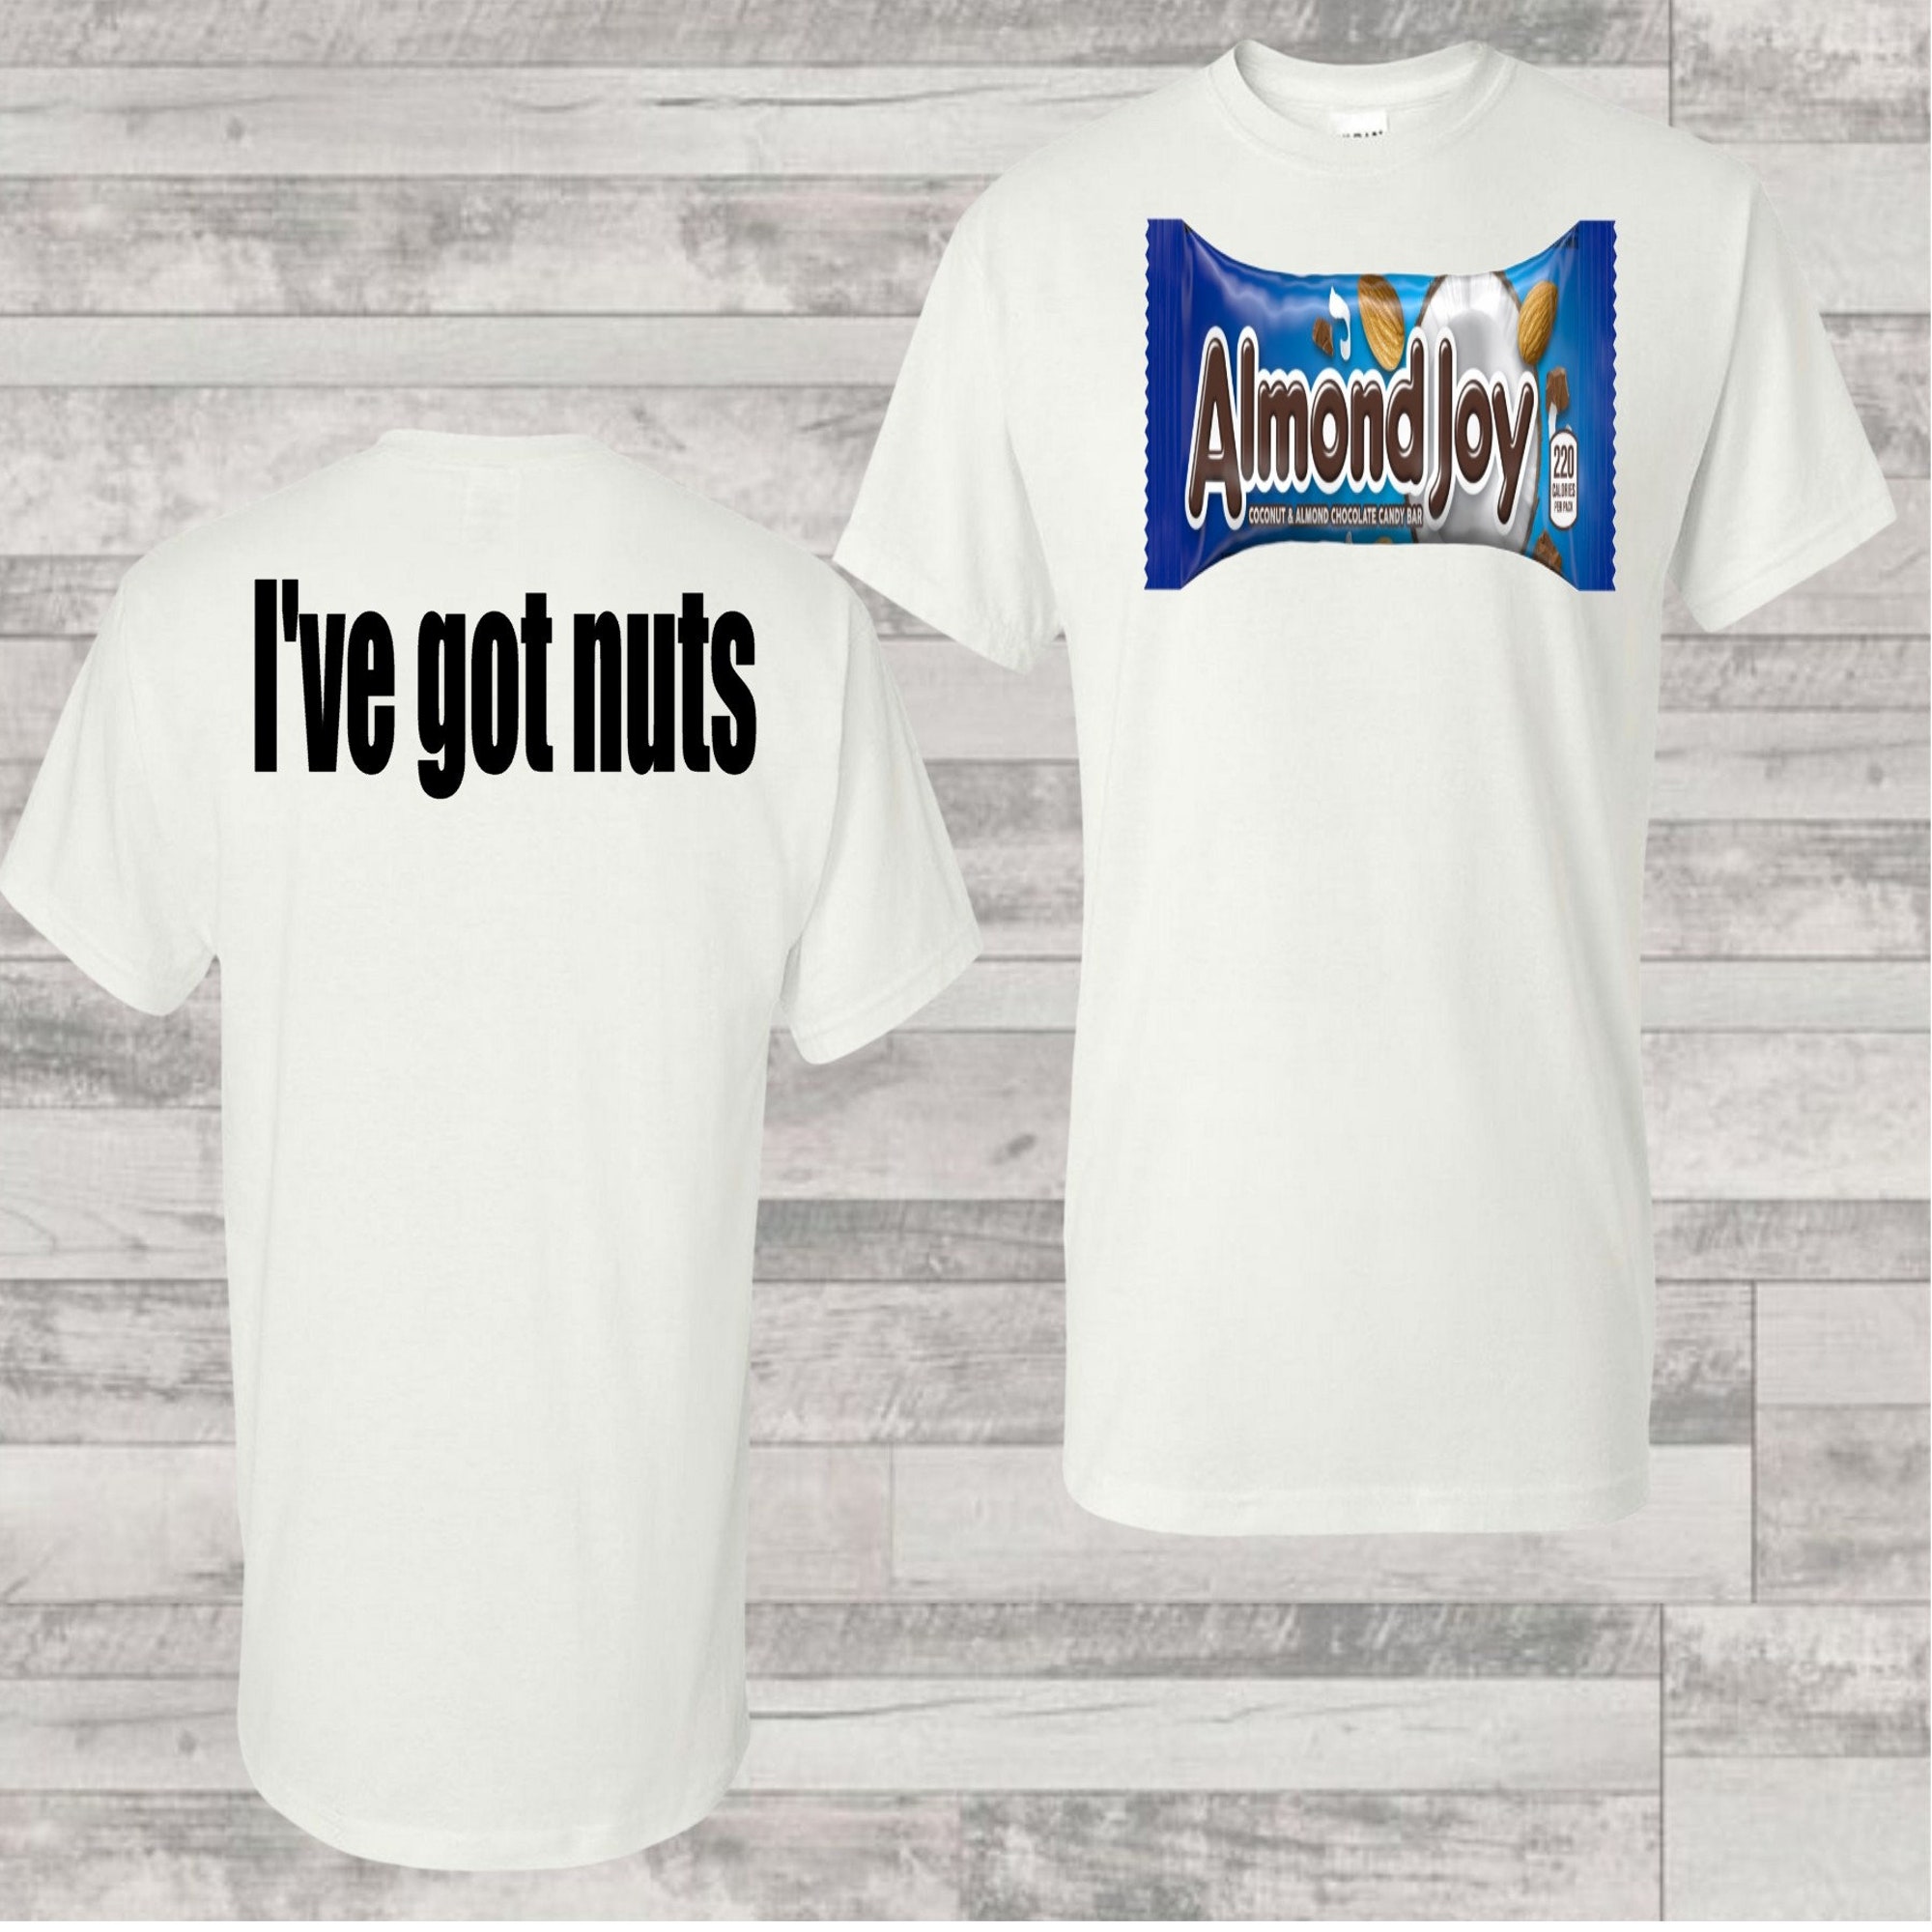 Inspired by Almond Joy I've got nuts and Mounds I don't shirt